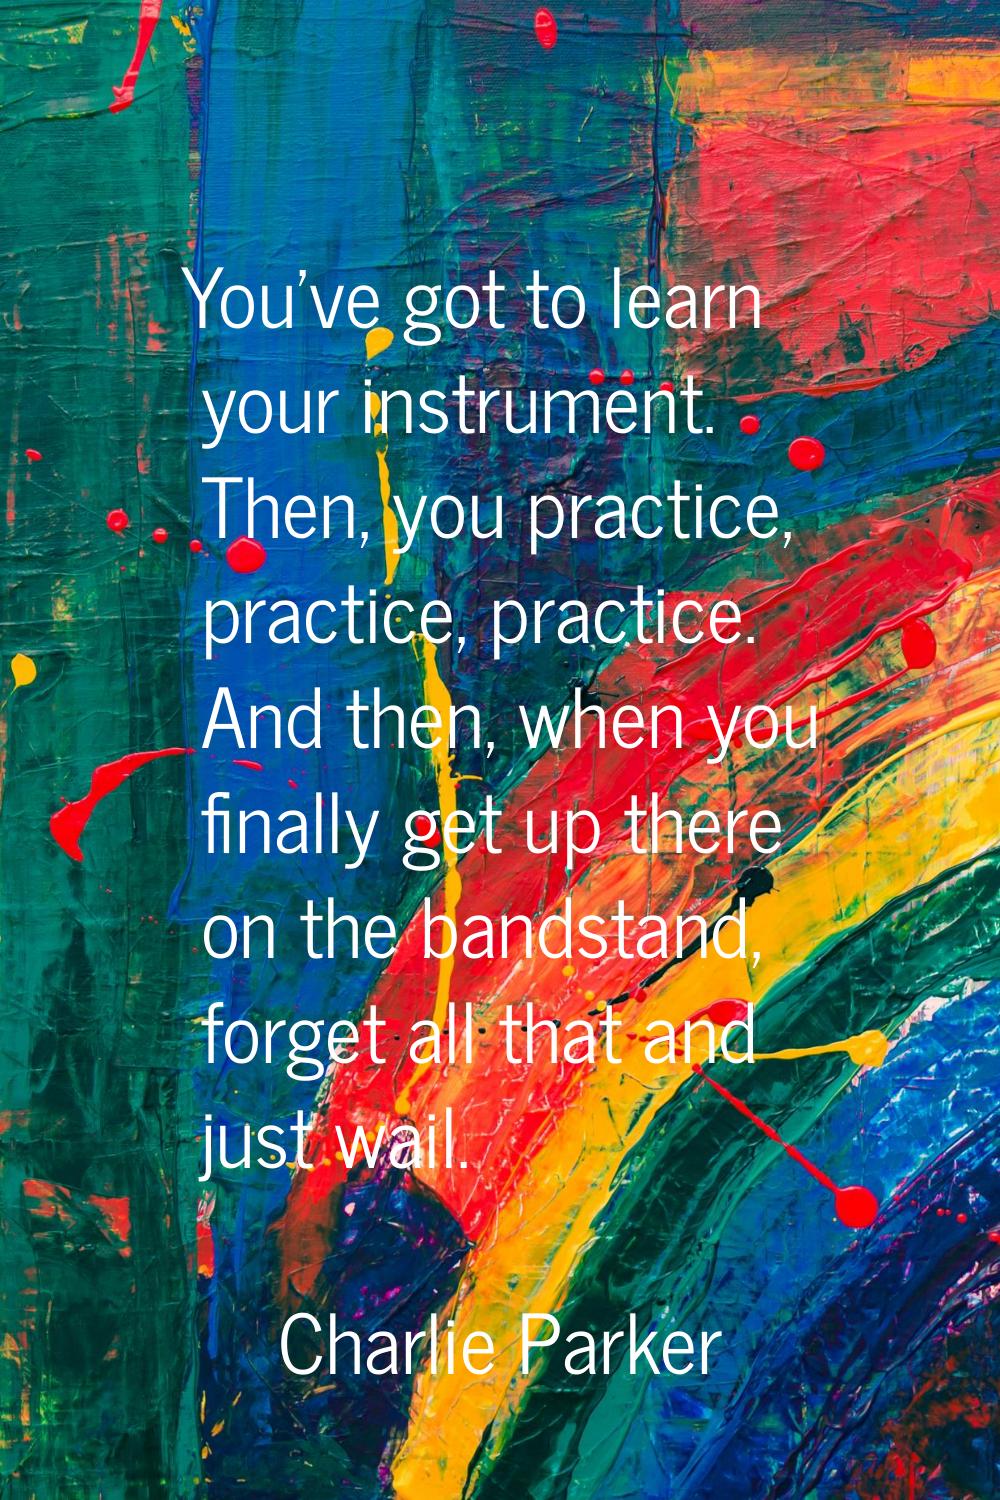 You've got to learn your instrument. Then, you practice, practice, practice. And then, when you fin